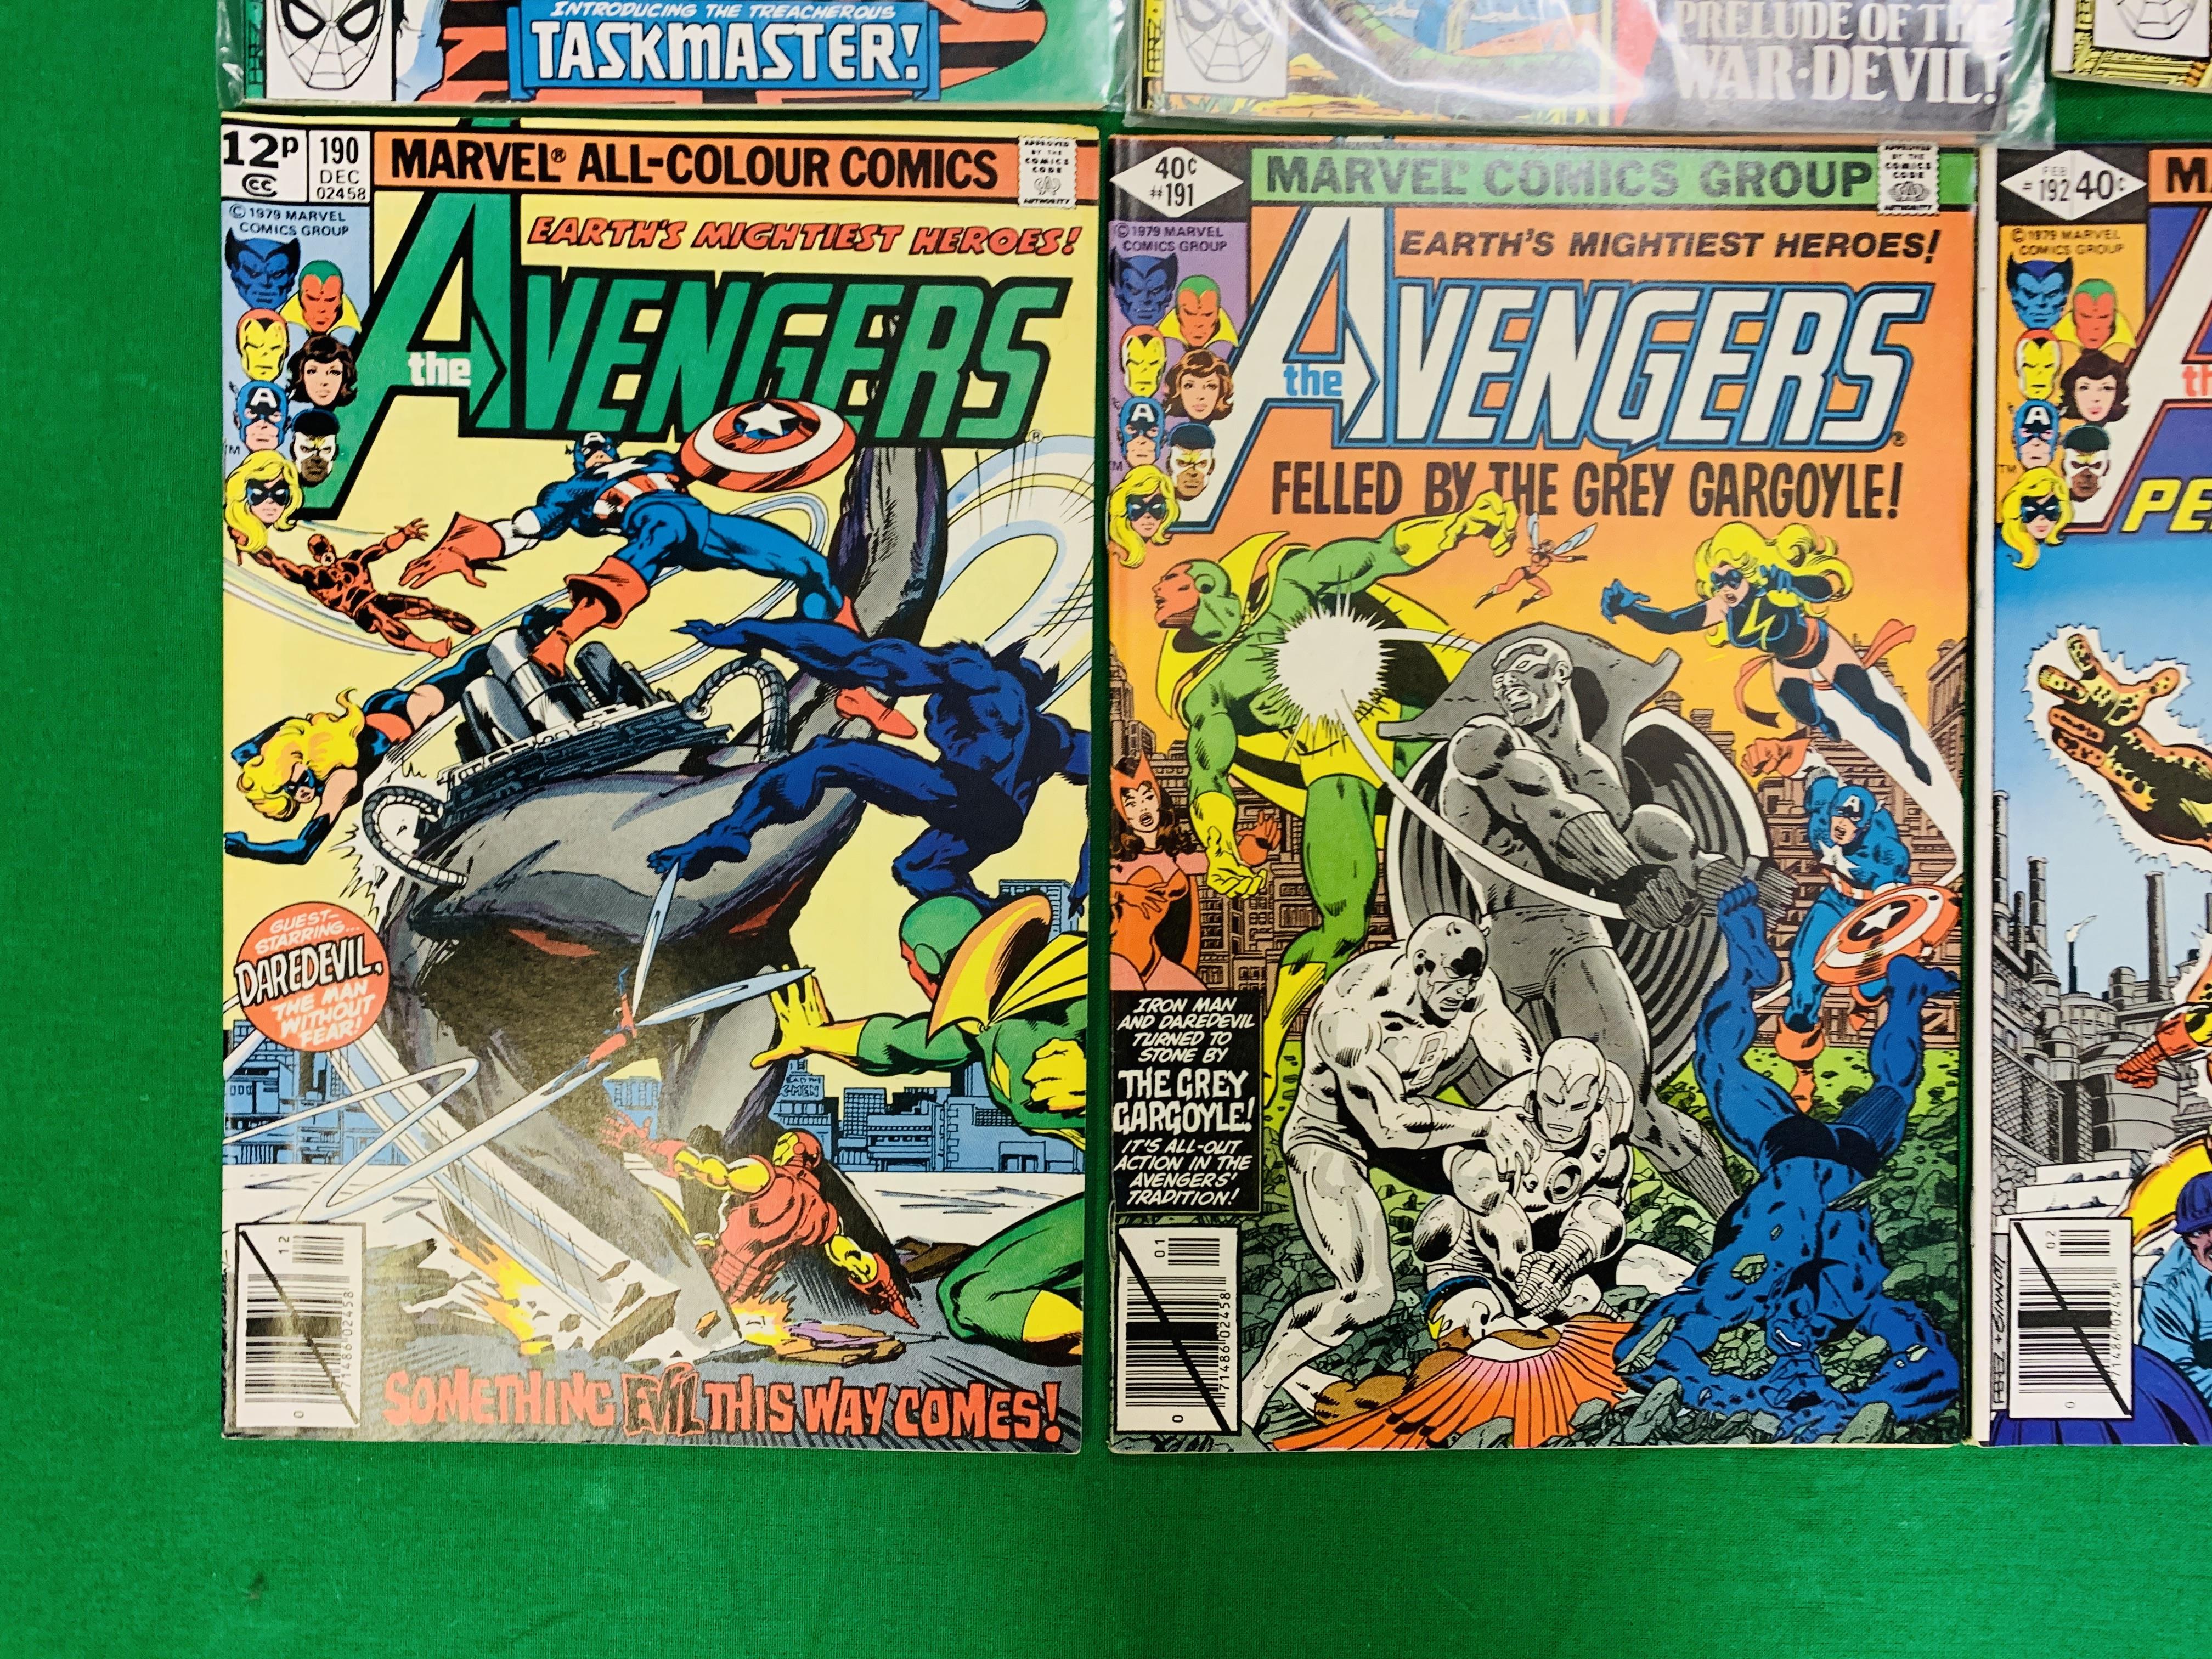 MARVEL COMICS THE AVENGERS NO. 101 - 299, MISSING ISSUES 103 AND 110. - Image 68 of 130